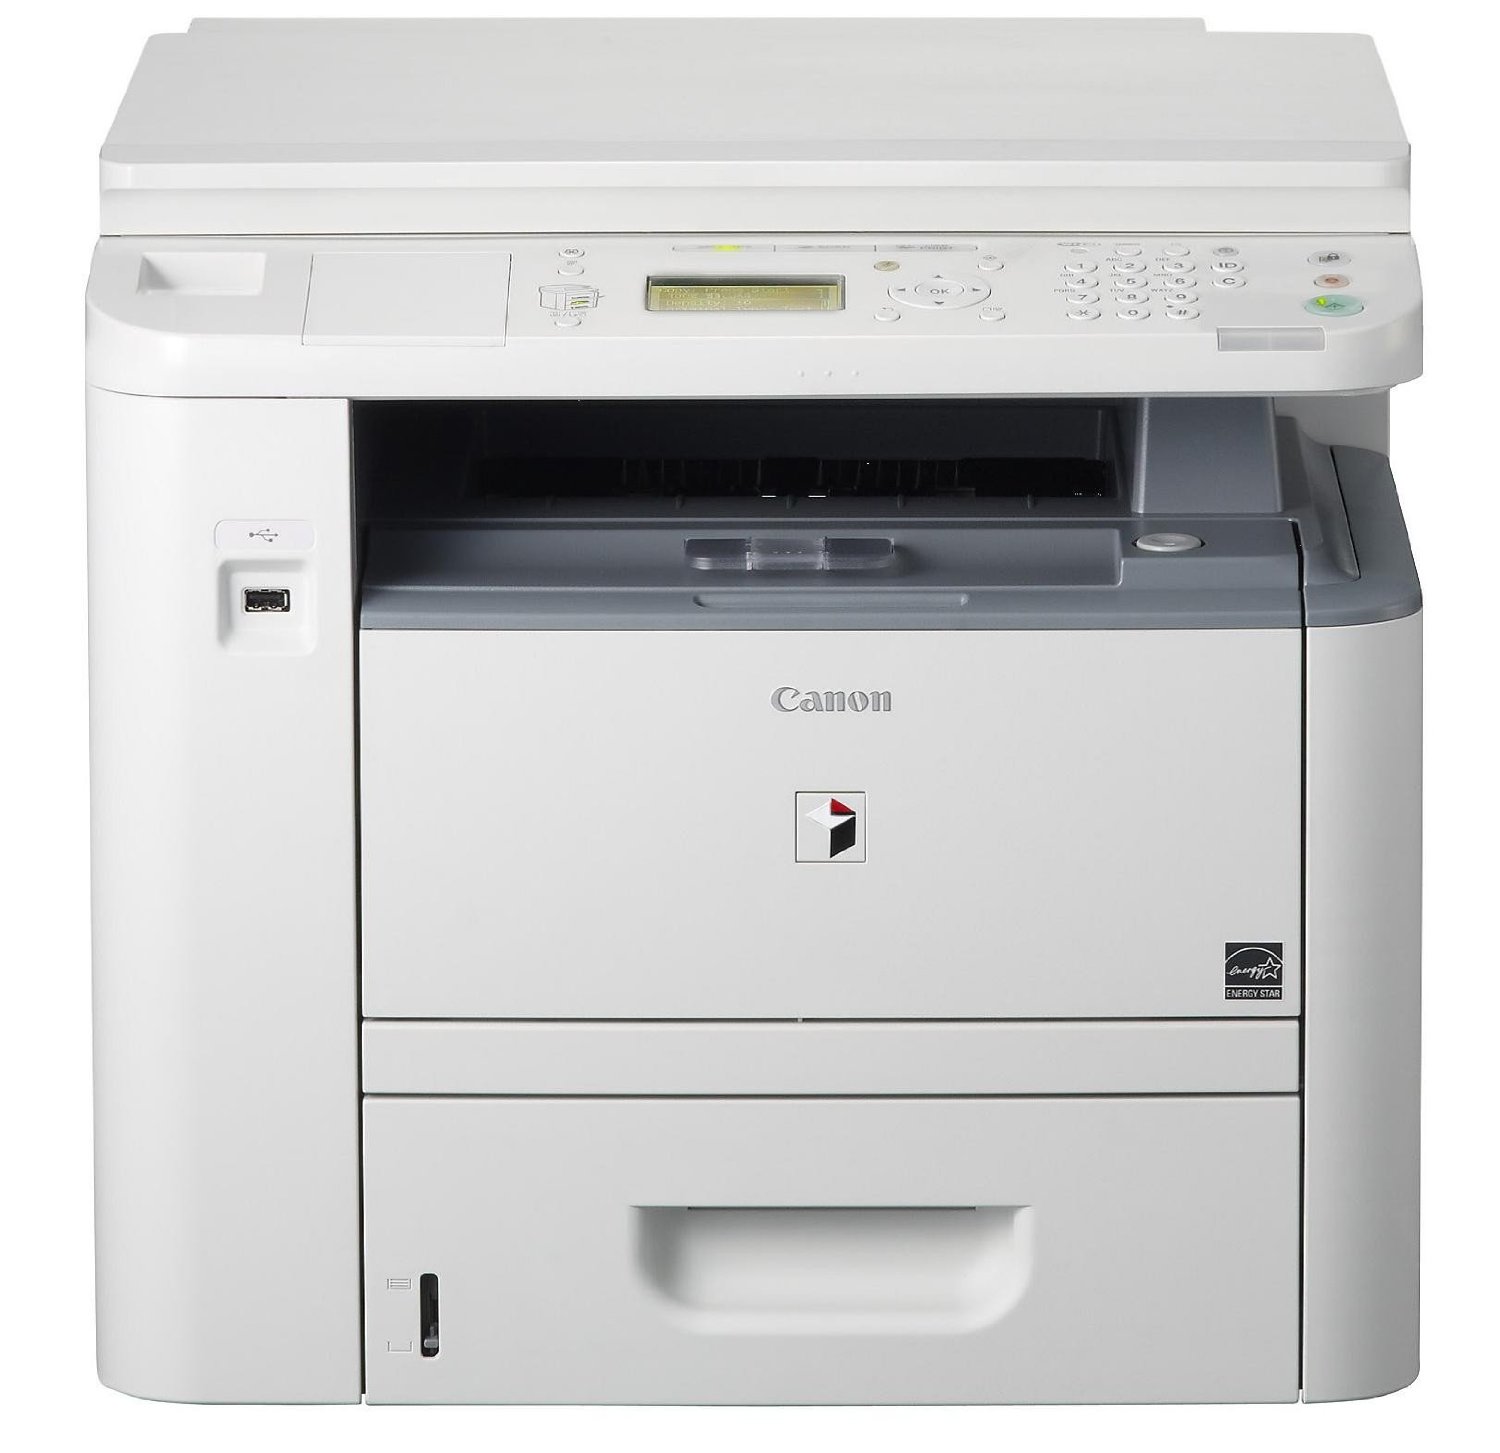 Canon Imagerunner 1133 Driver Download